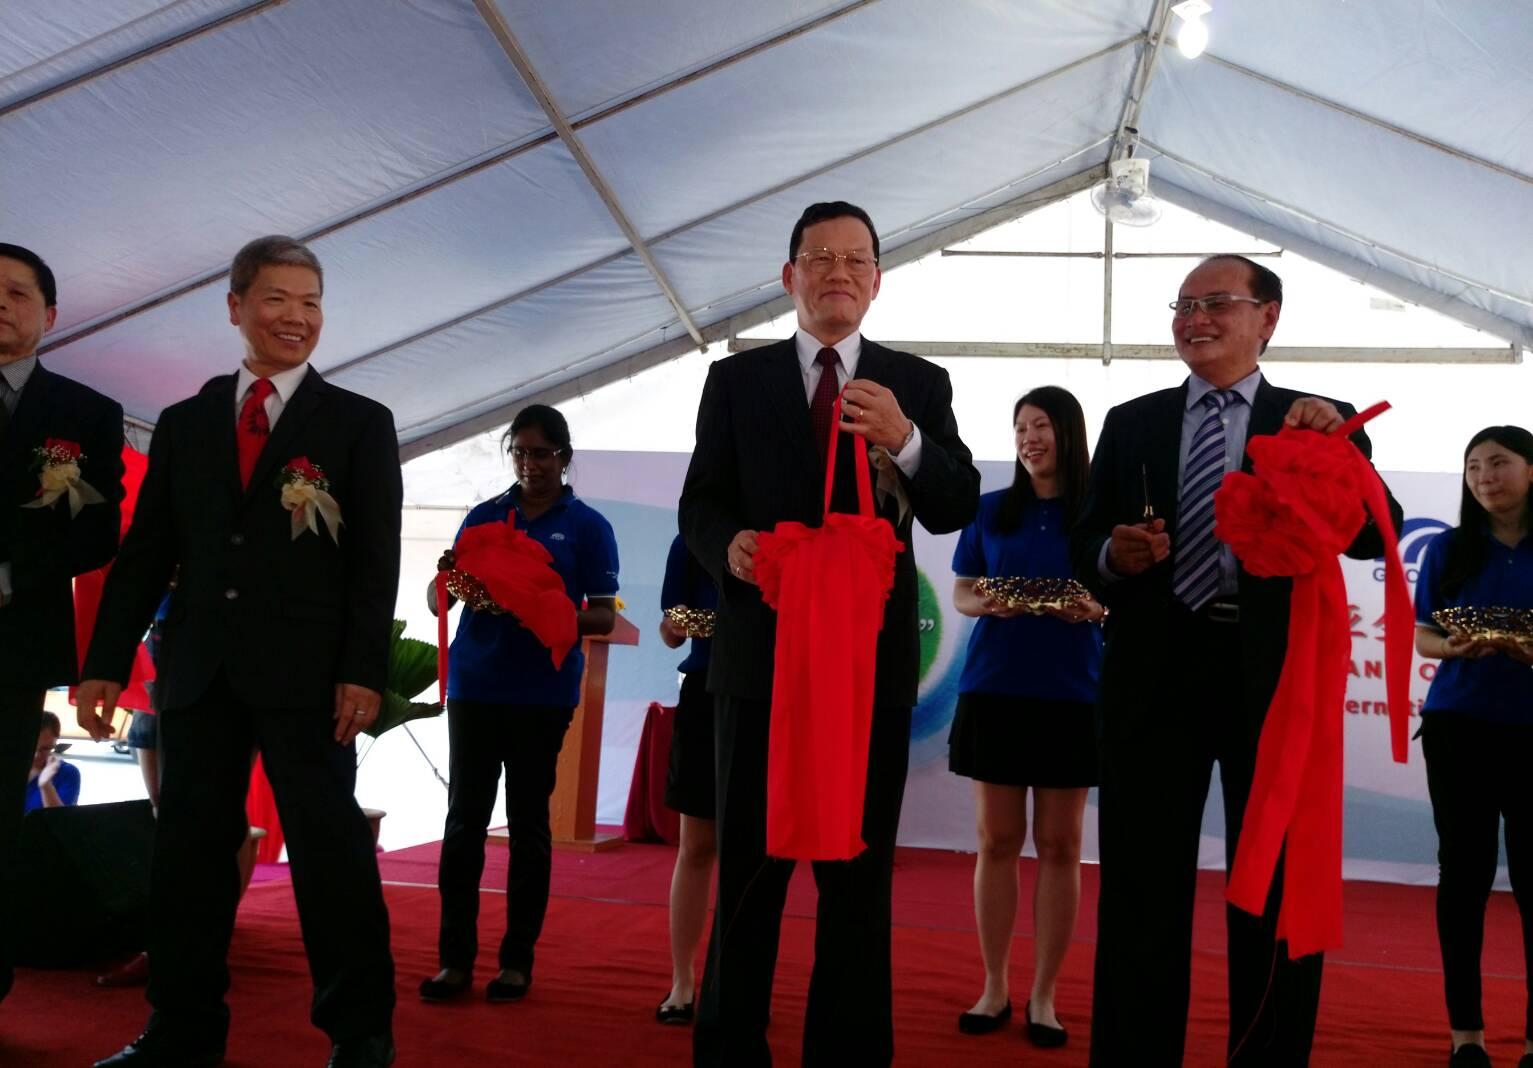 Representative Chang, James Chi-ping attends the opening ceremony of Vio Star International (M) Sdn Bhd in Negeri Sembilan on March 21, 2017.
